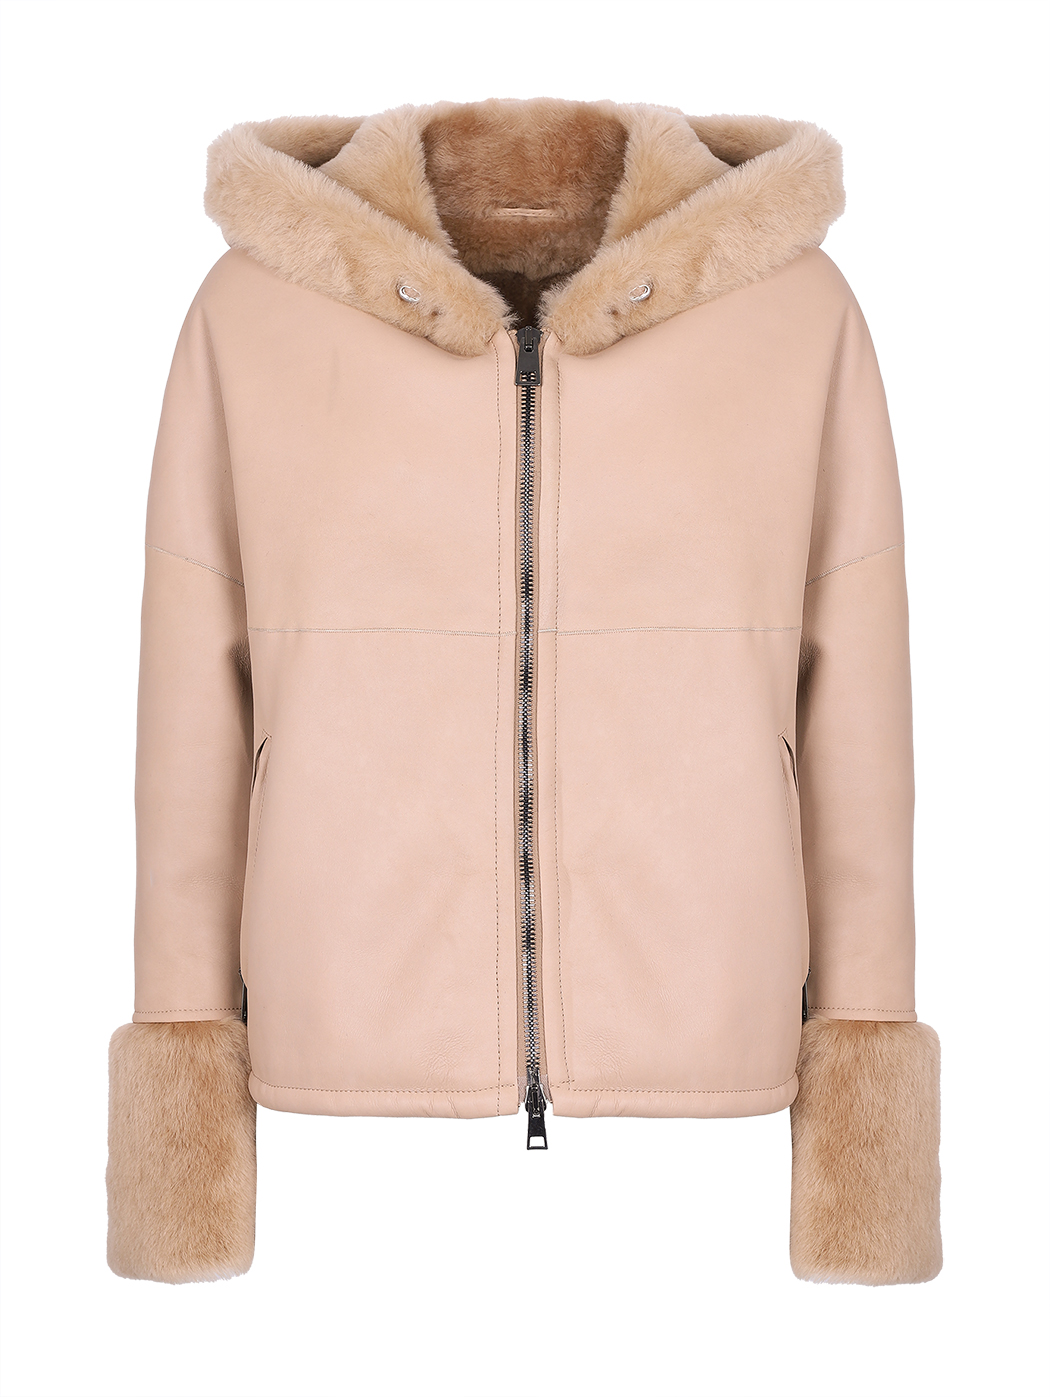 Hooded Double-faced One Size Shearling Jacket Beige